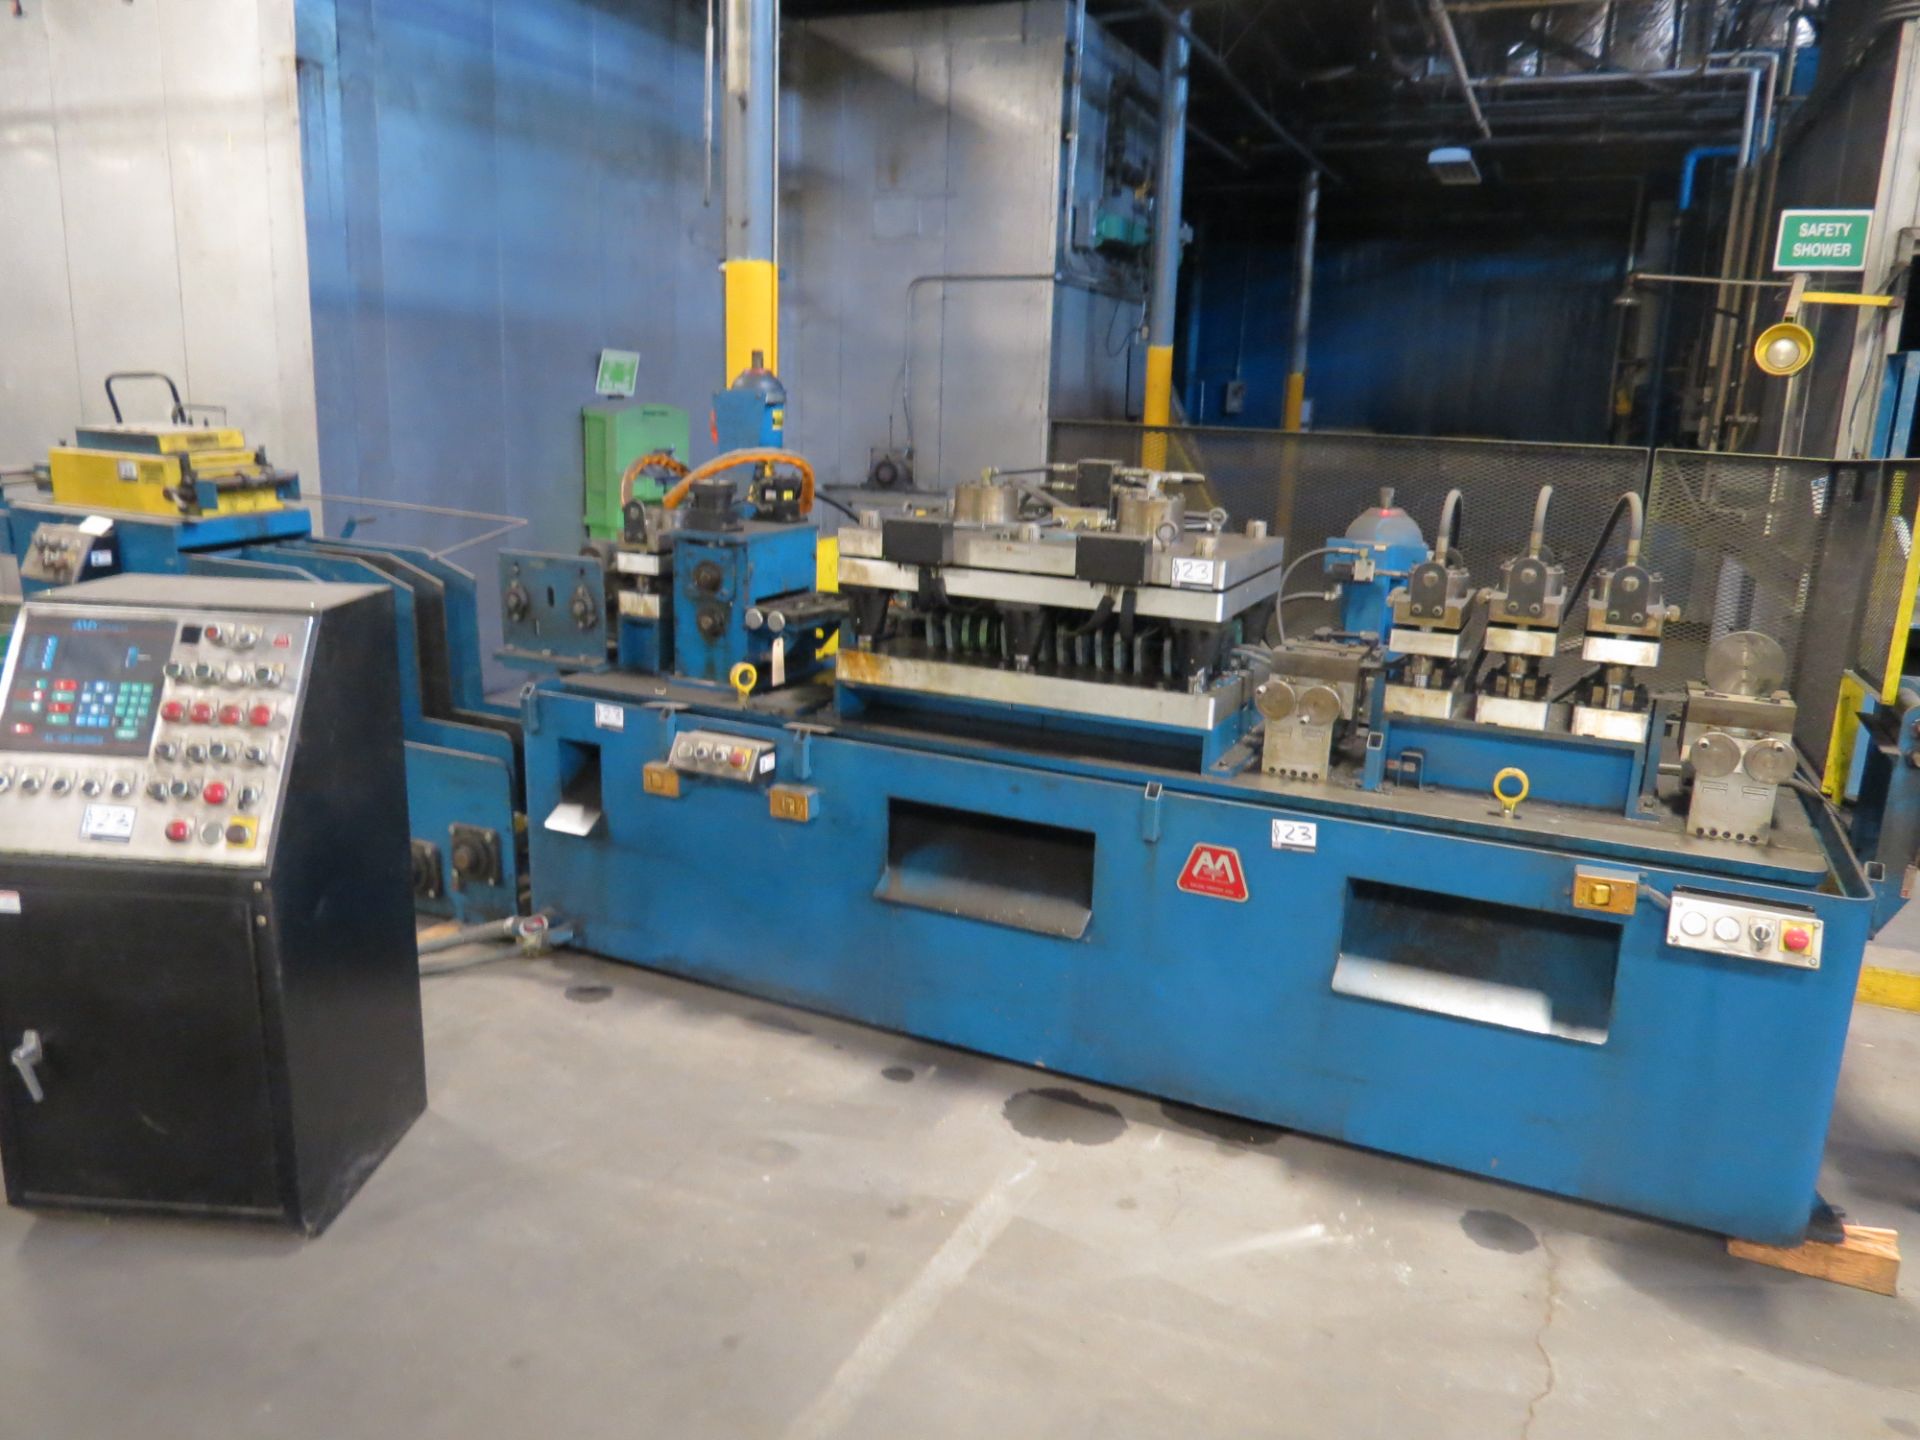 AMS Material Straightener with hyd shear & punches, XL 100 Controls - Image 5 of 7